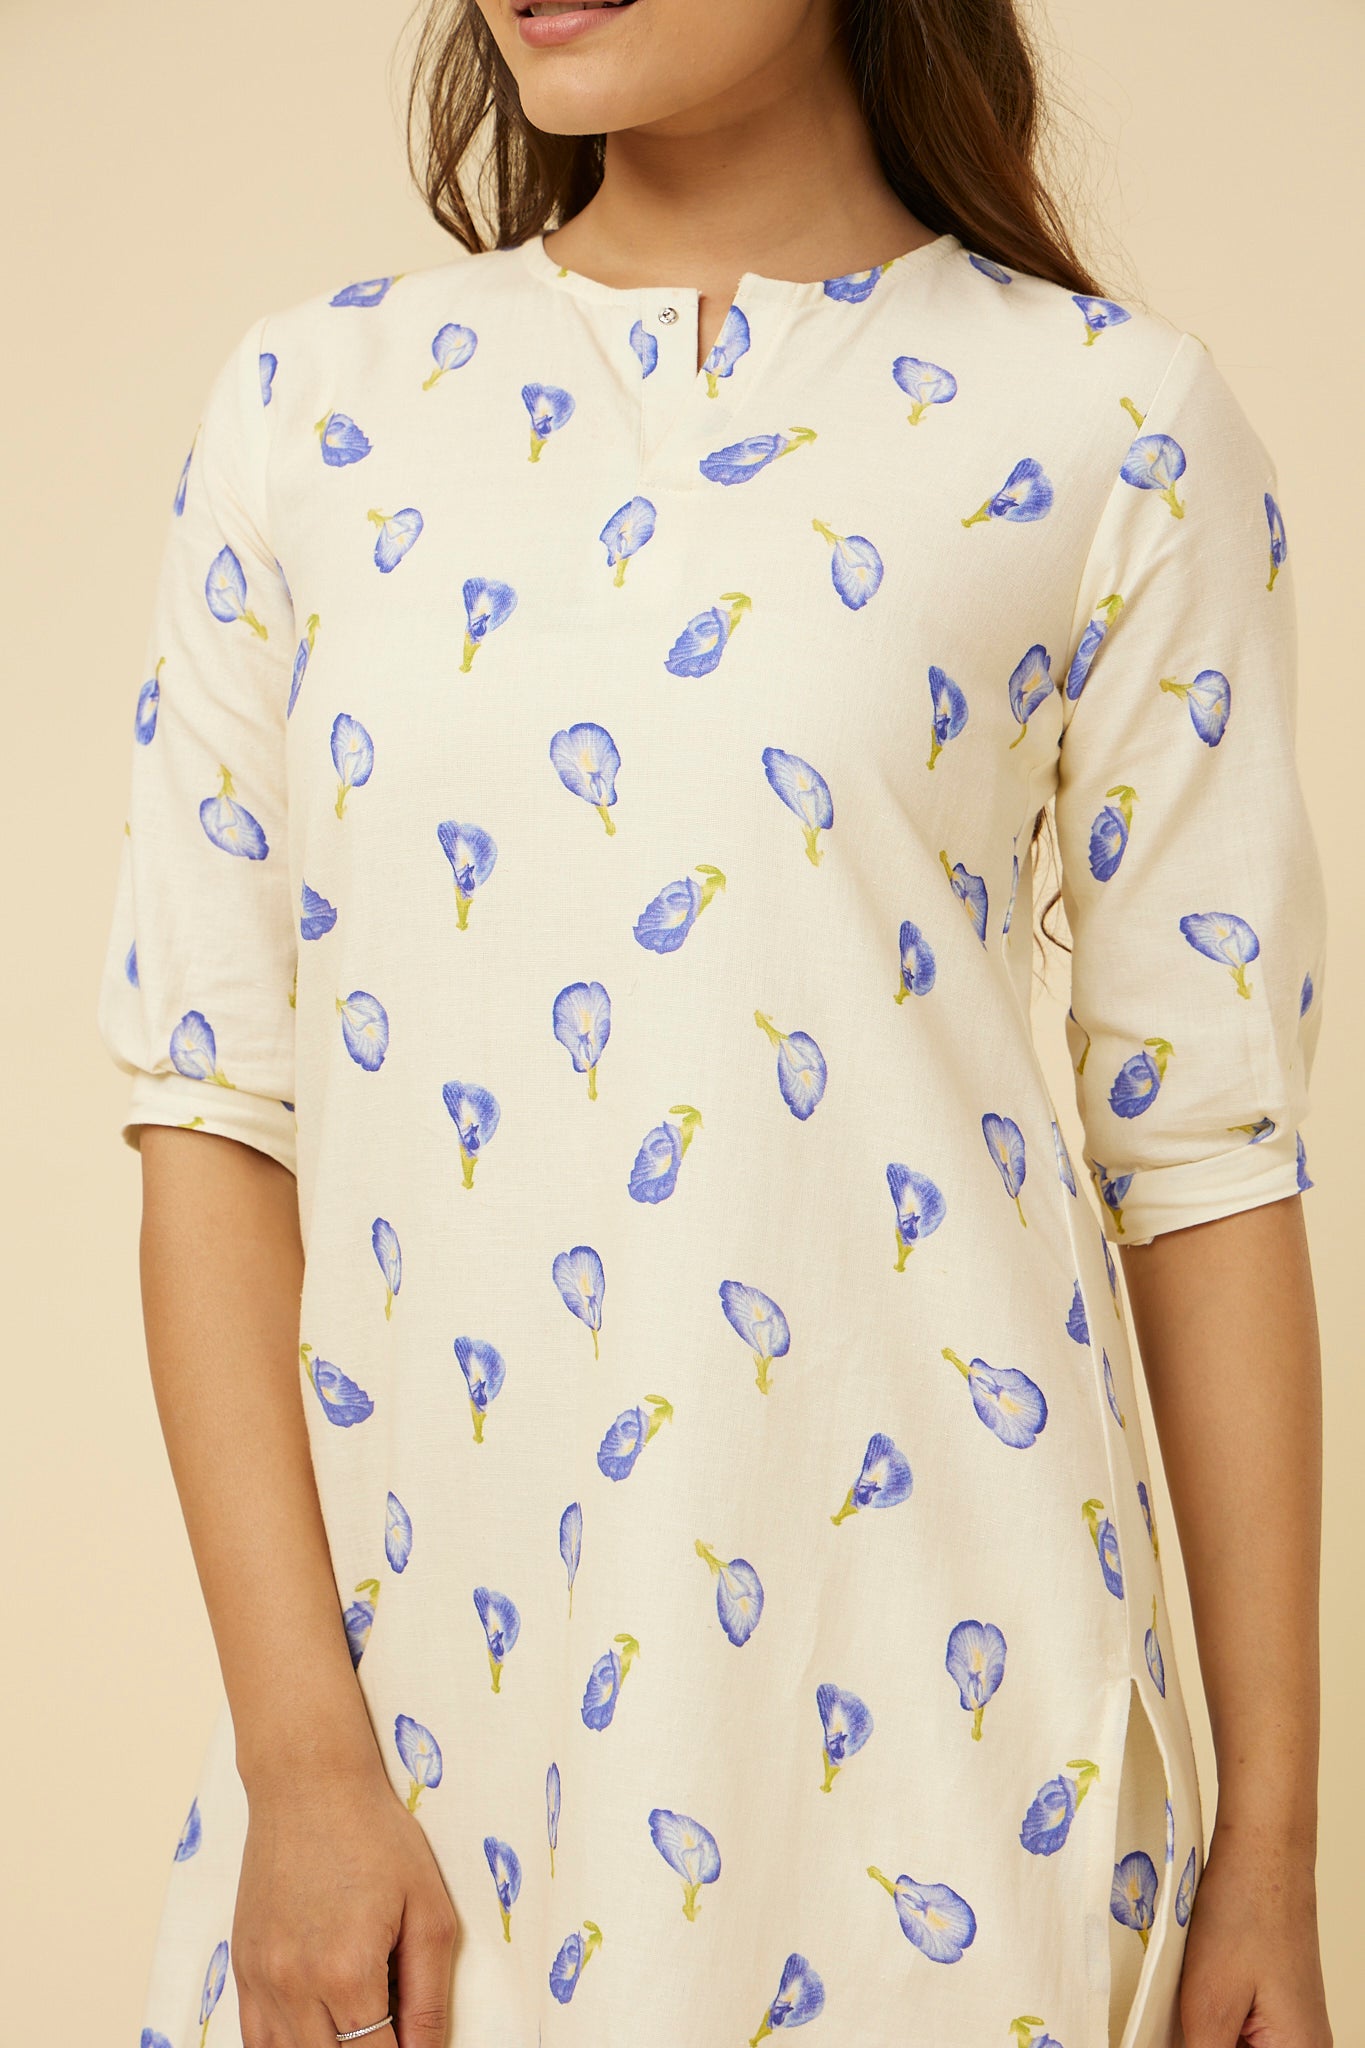 Detailed view of the Blue Pea Kurta's fabric and design, showcasing the subtle front slit and closed neckline, with the 3/4 long sleeves enhancing the sleek look, all in a delicate blue pea floral print on white.